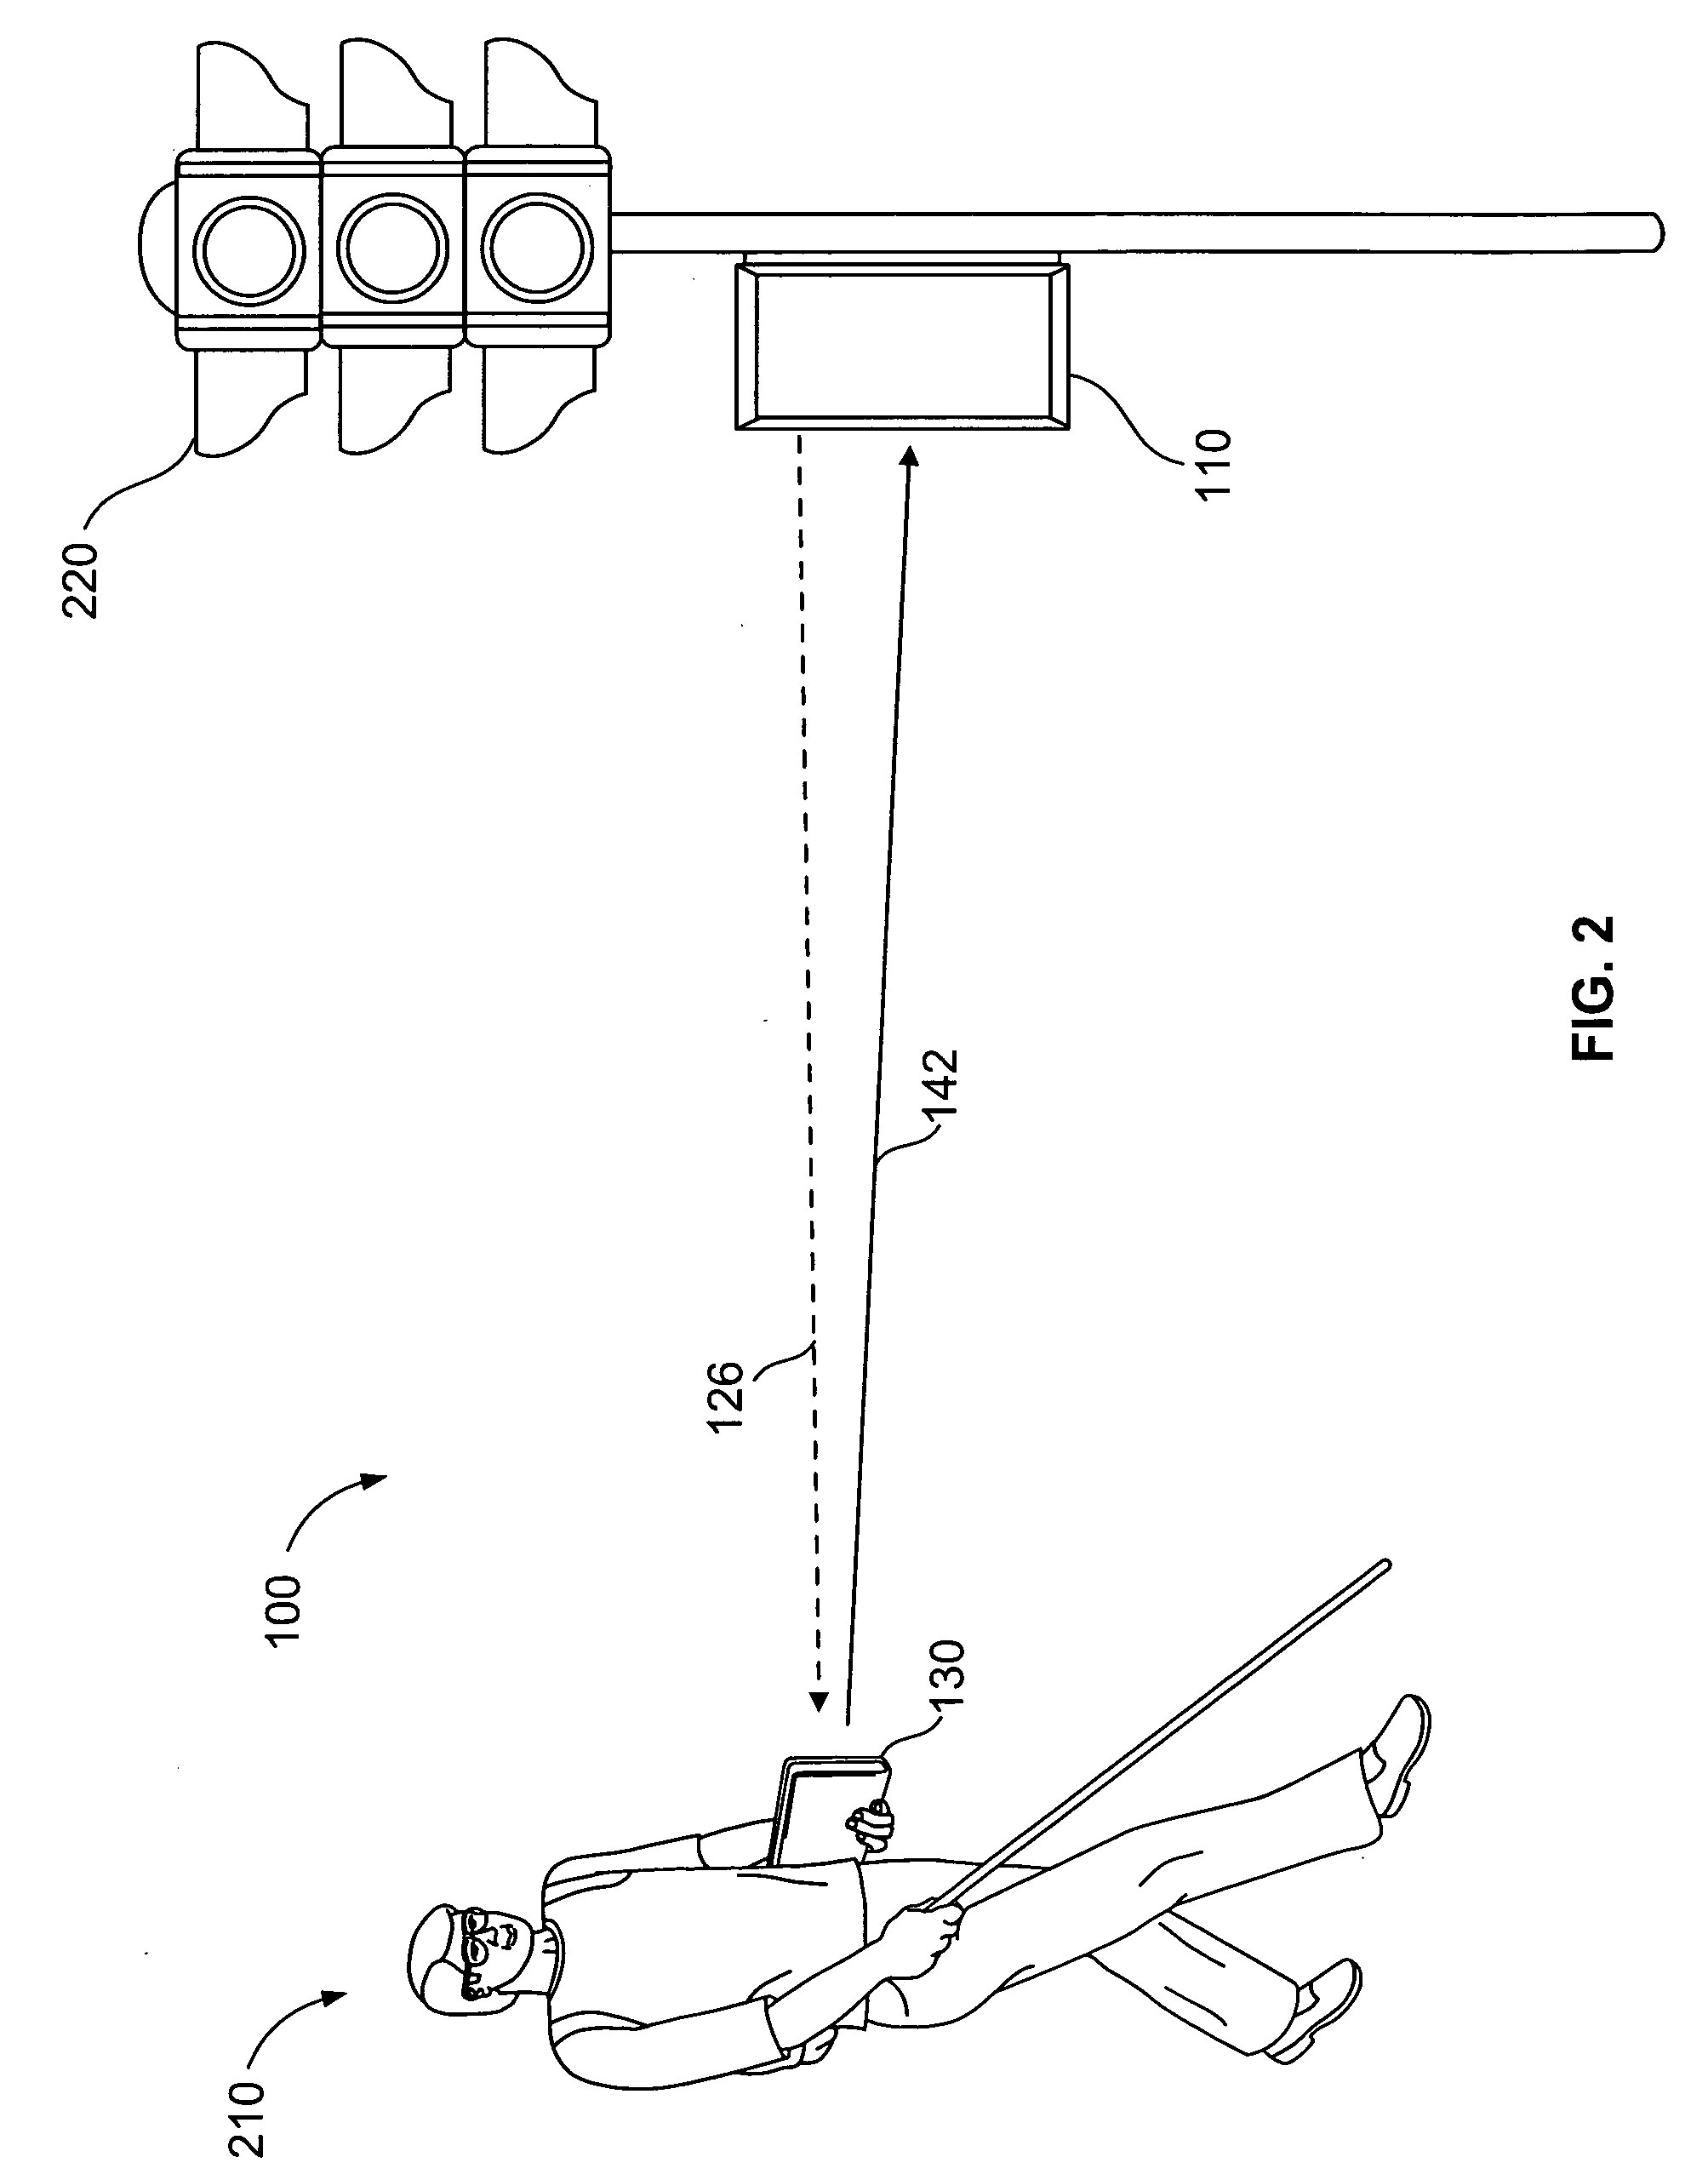 System, device and method for providing onsite information to aid visually and/or hearing impaired persons